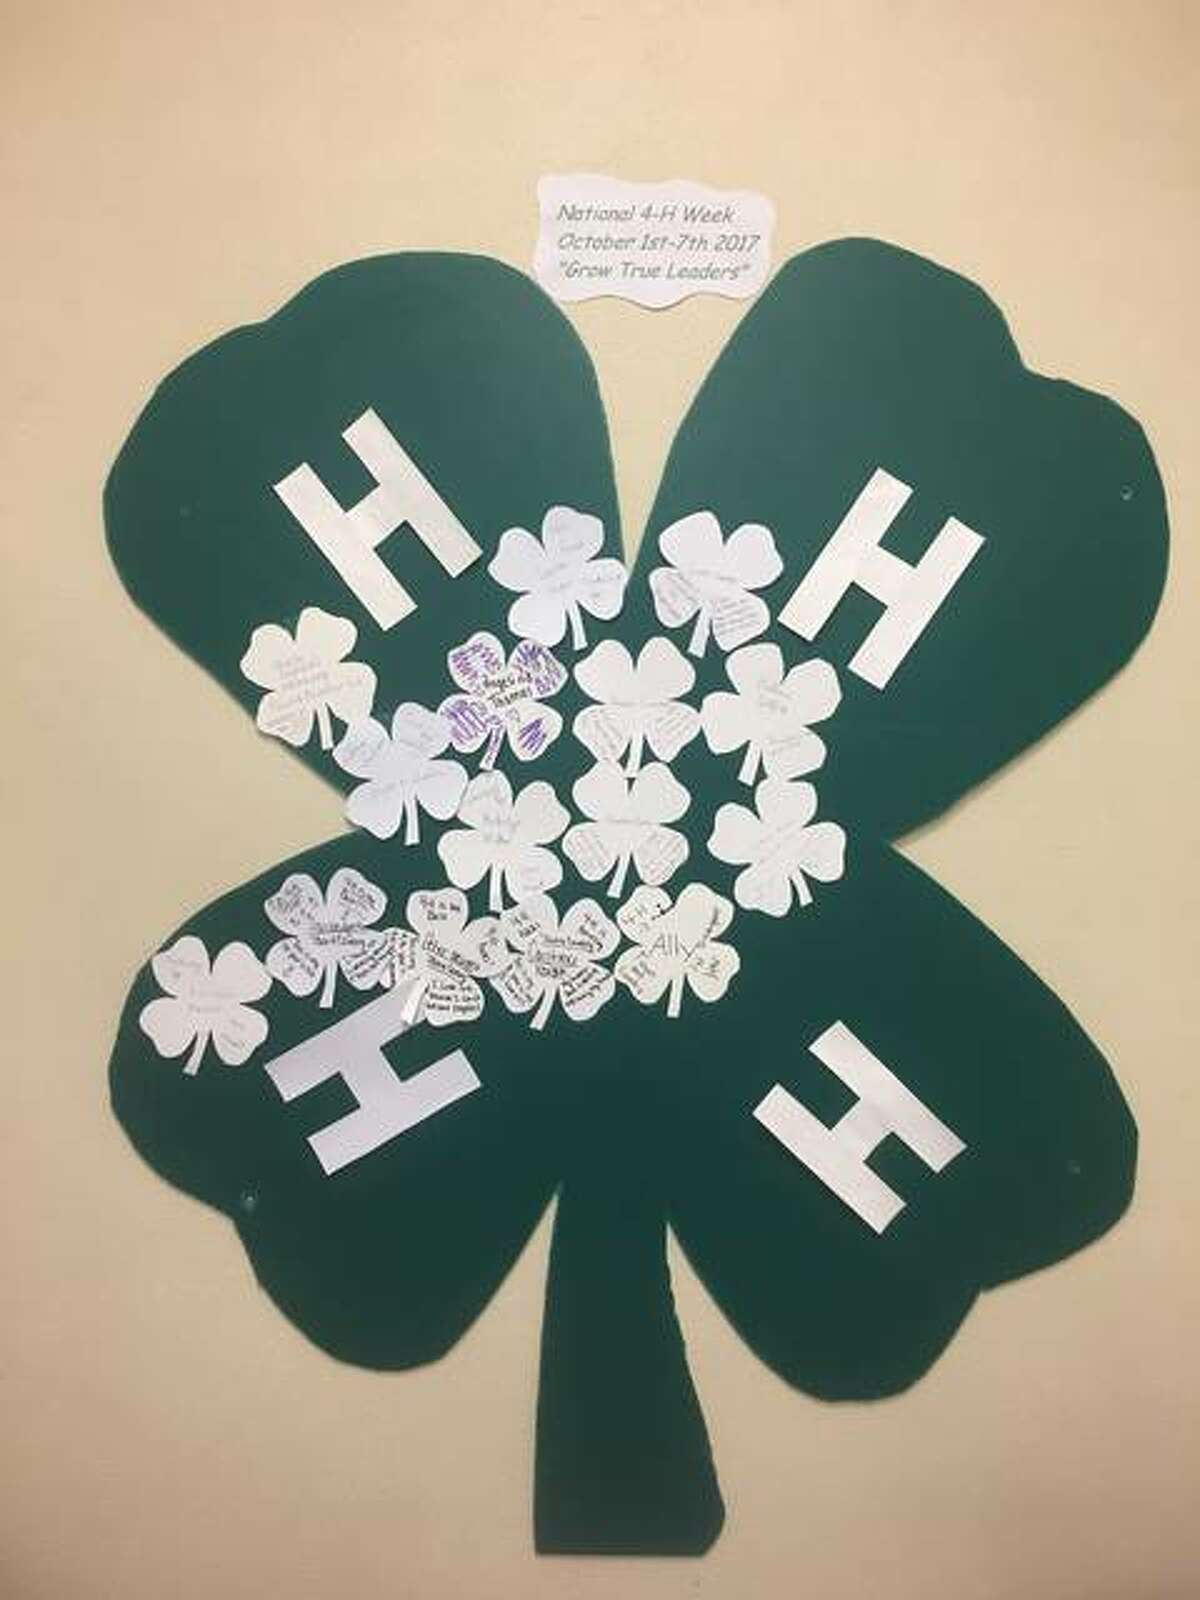 Town and Country 4-H Club’s activities this week include a glass case display at the Bethalto Public Library, 321 S. Prairie St., where four-leaf clovers feature four statements of what members — past or present — value through 4-H; and displays of a big 4-H green clover on social media pages.